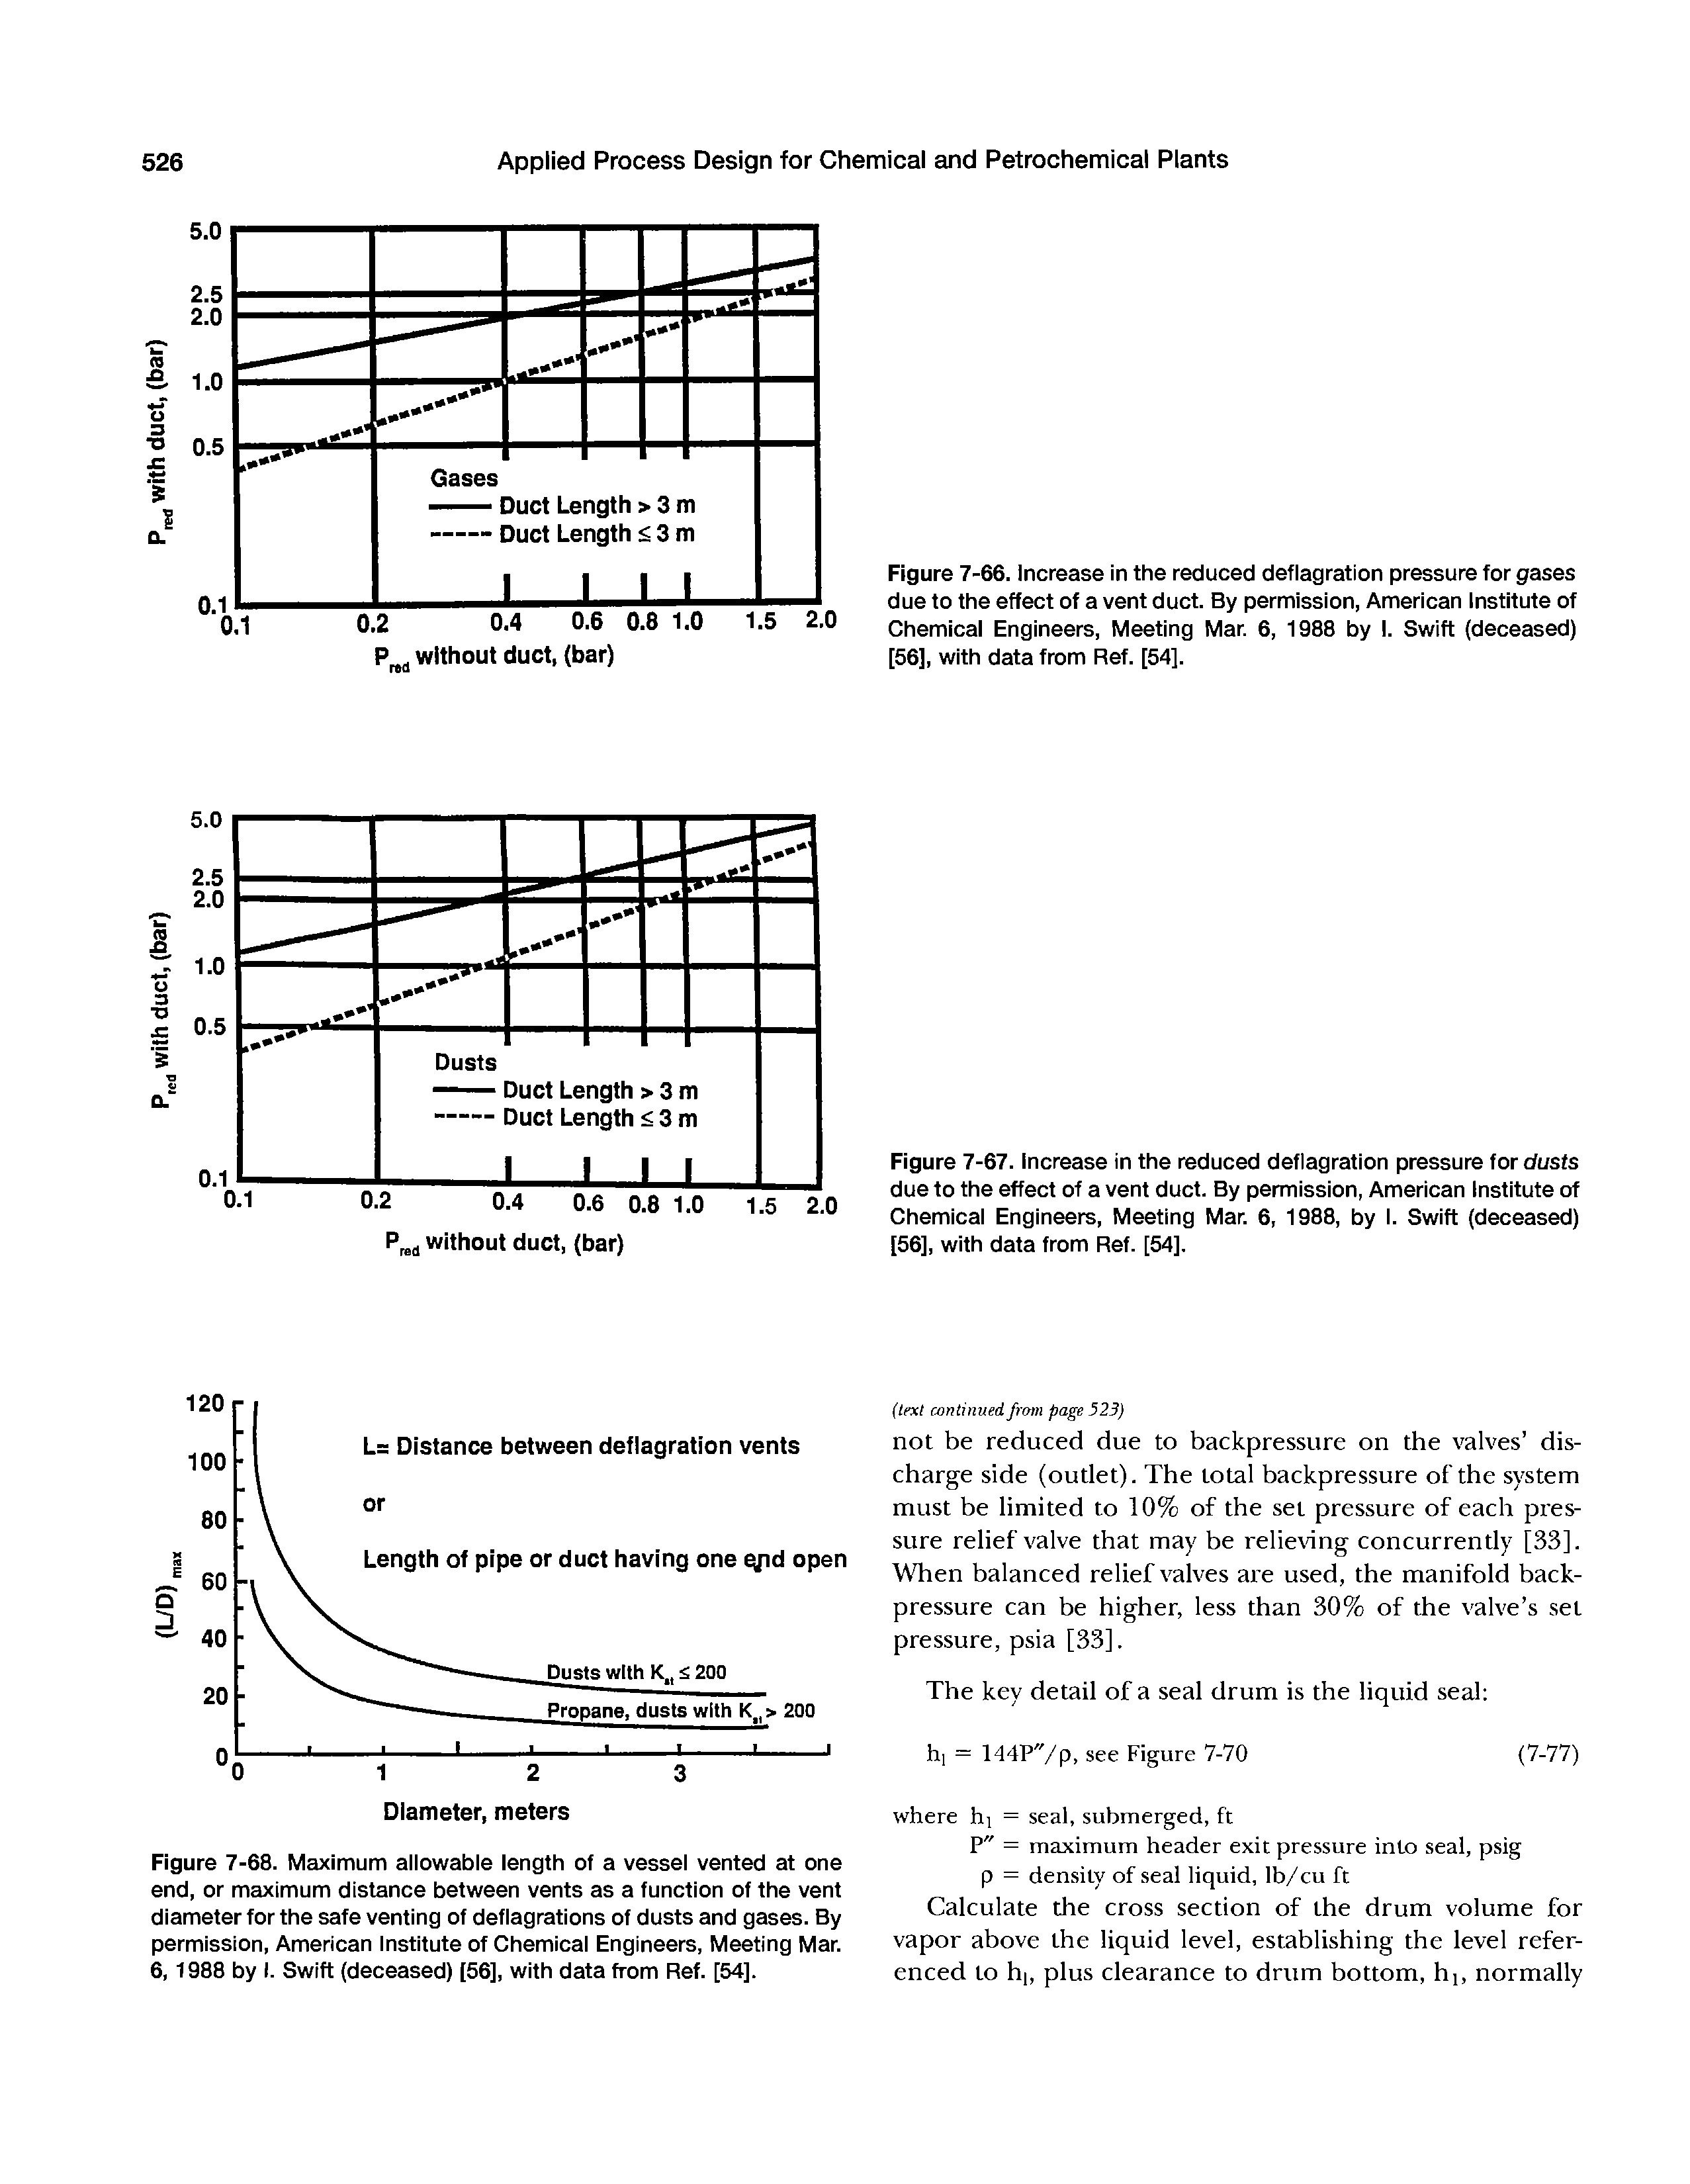 Figure 7-66. Increase in the reduced deflagration pressure for gases due to the effect of a vent duct. By permission, American Institute of Chemical Engineers, Meeting Mar. 6, 1988 by I. Swift (deceased) [56], with data from Ref. [54].